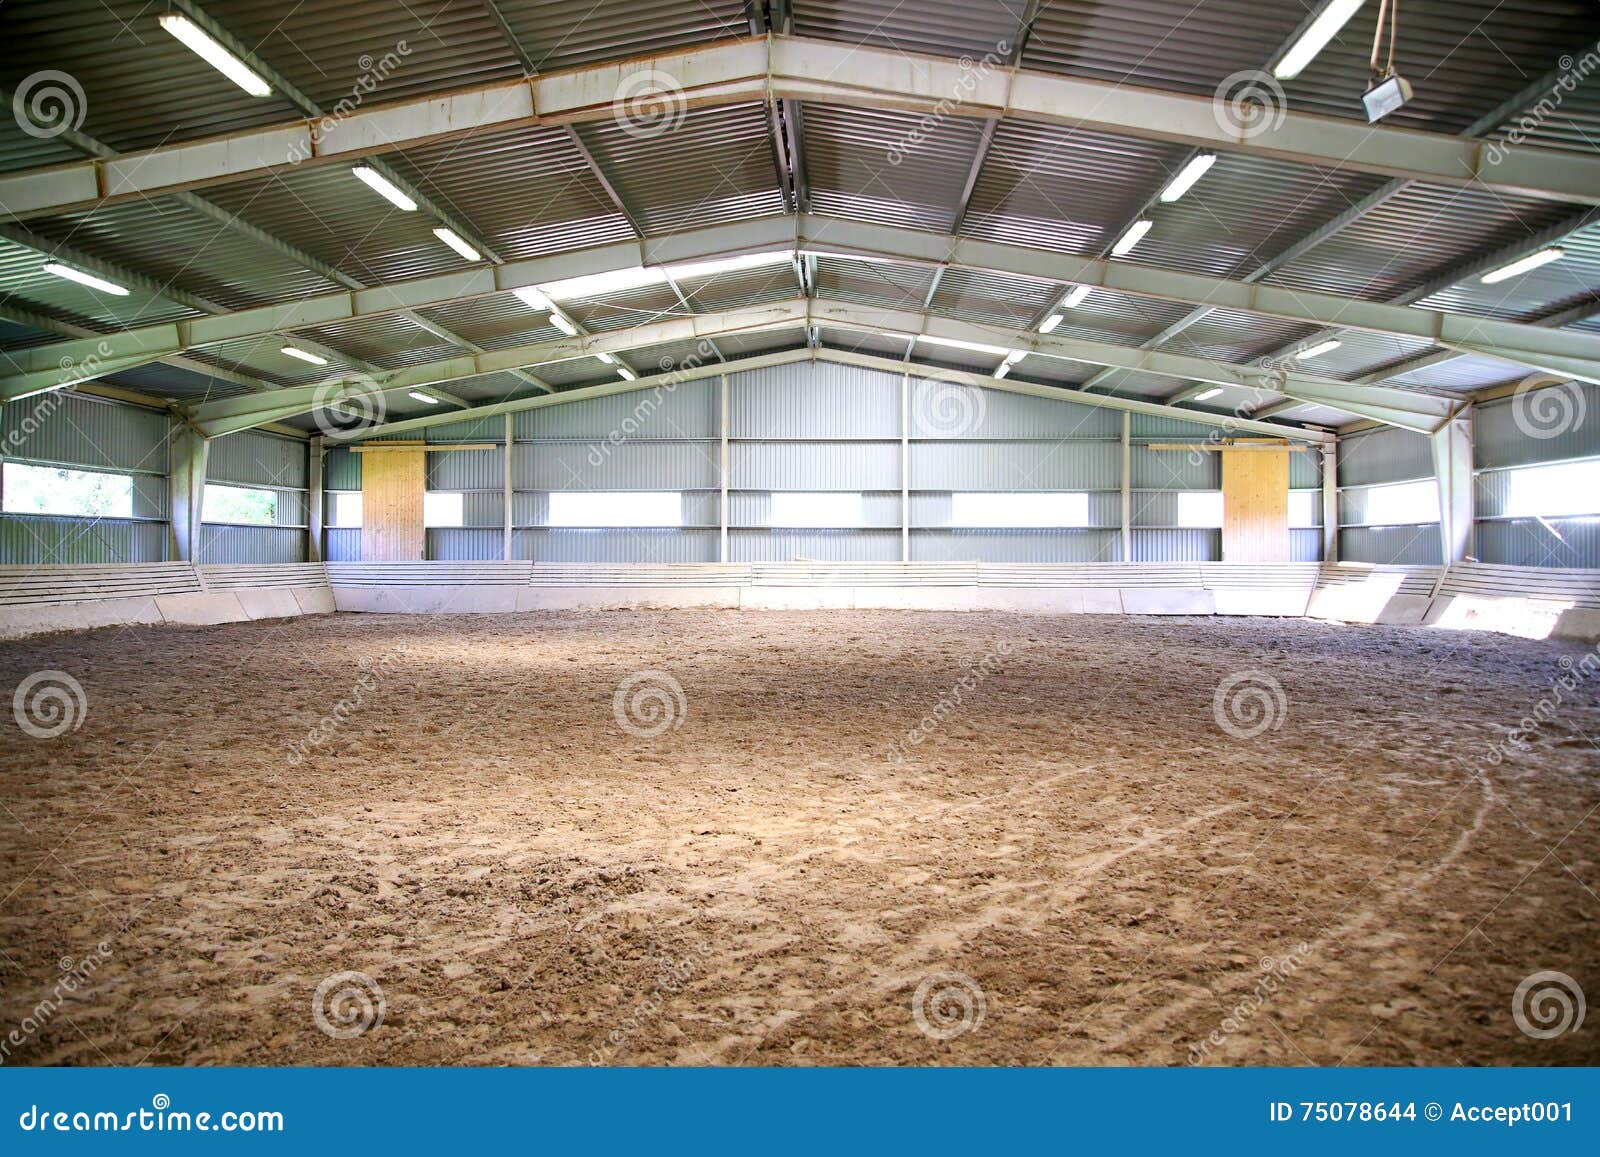 view an riding arena indoor without people